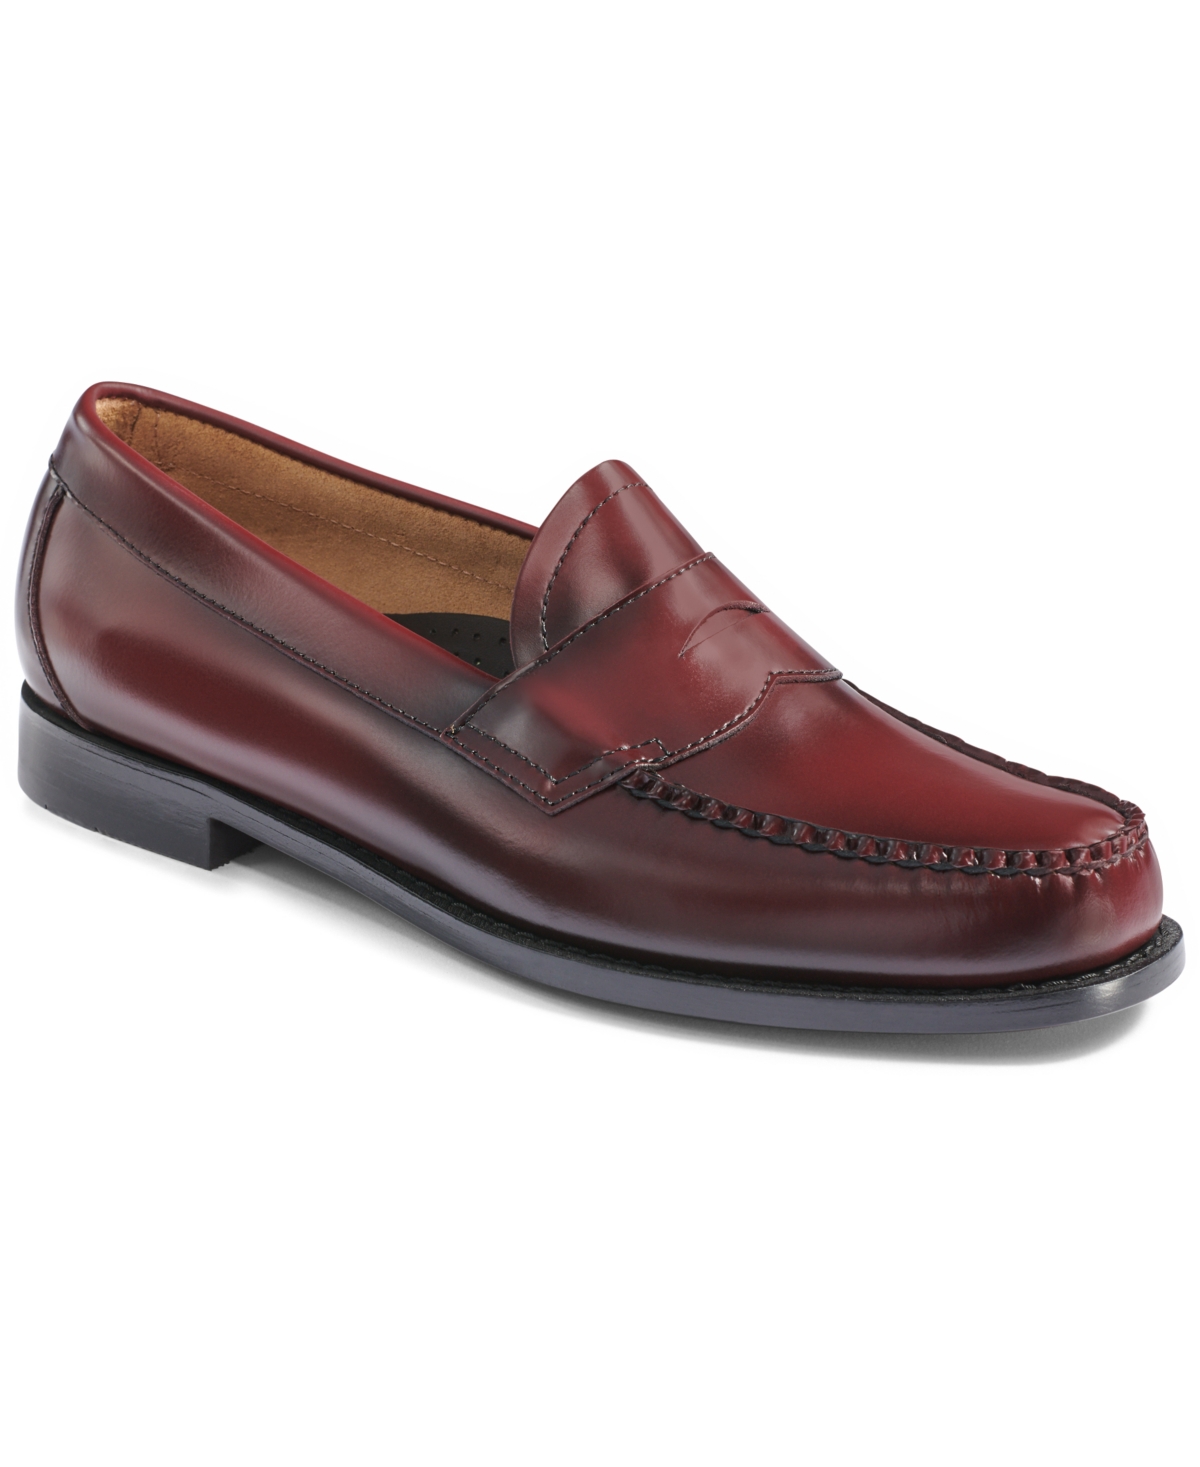 Shop Gh Bass G.h.bass Men's 1936 Logan Flat Strap Weejuns Loafers In Wine